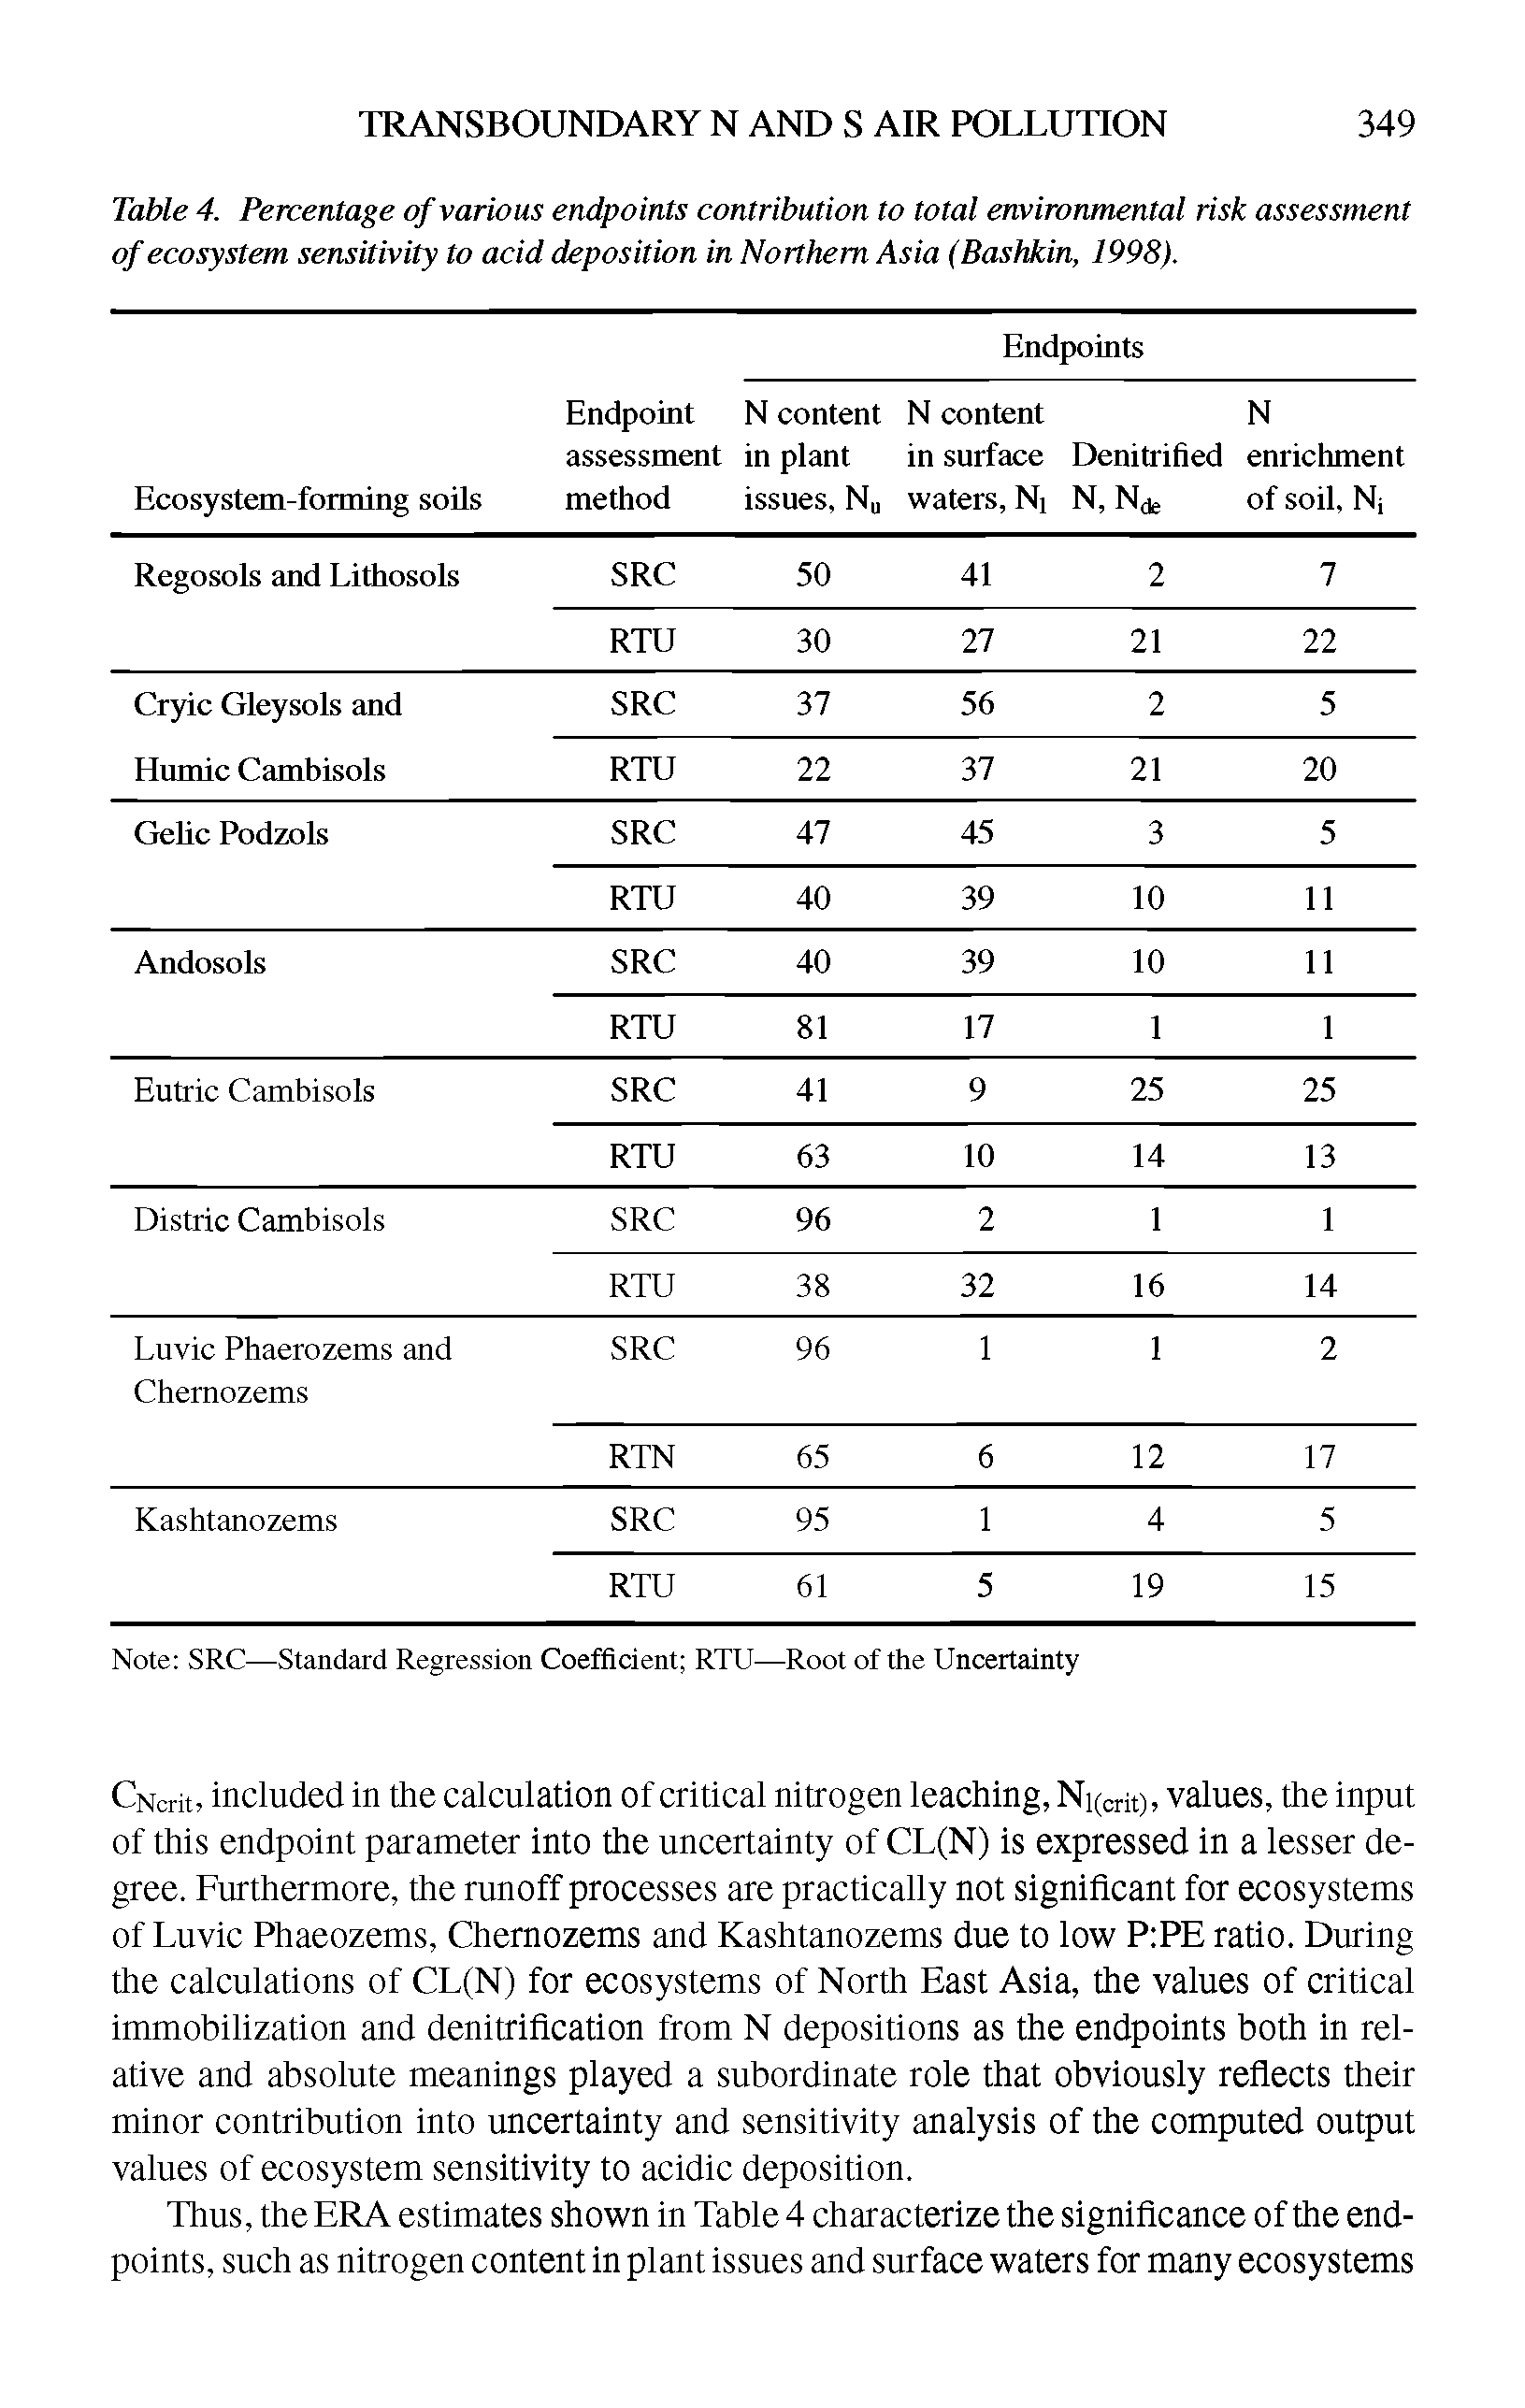 Table 4. Percentage of various endpoints contribution to total environmental risk assessment of ecosystem sensitivity to acid deposition in Northern Asia (Bashkin, 1998).